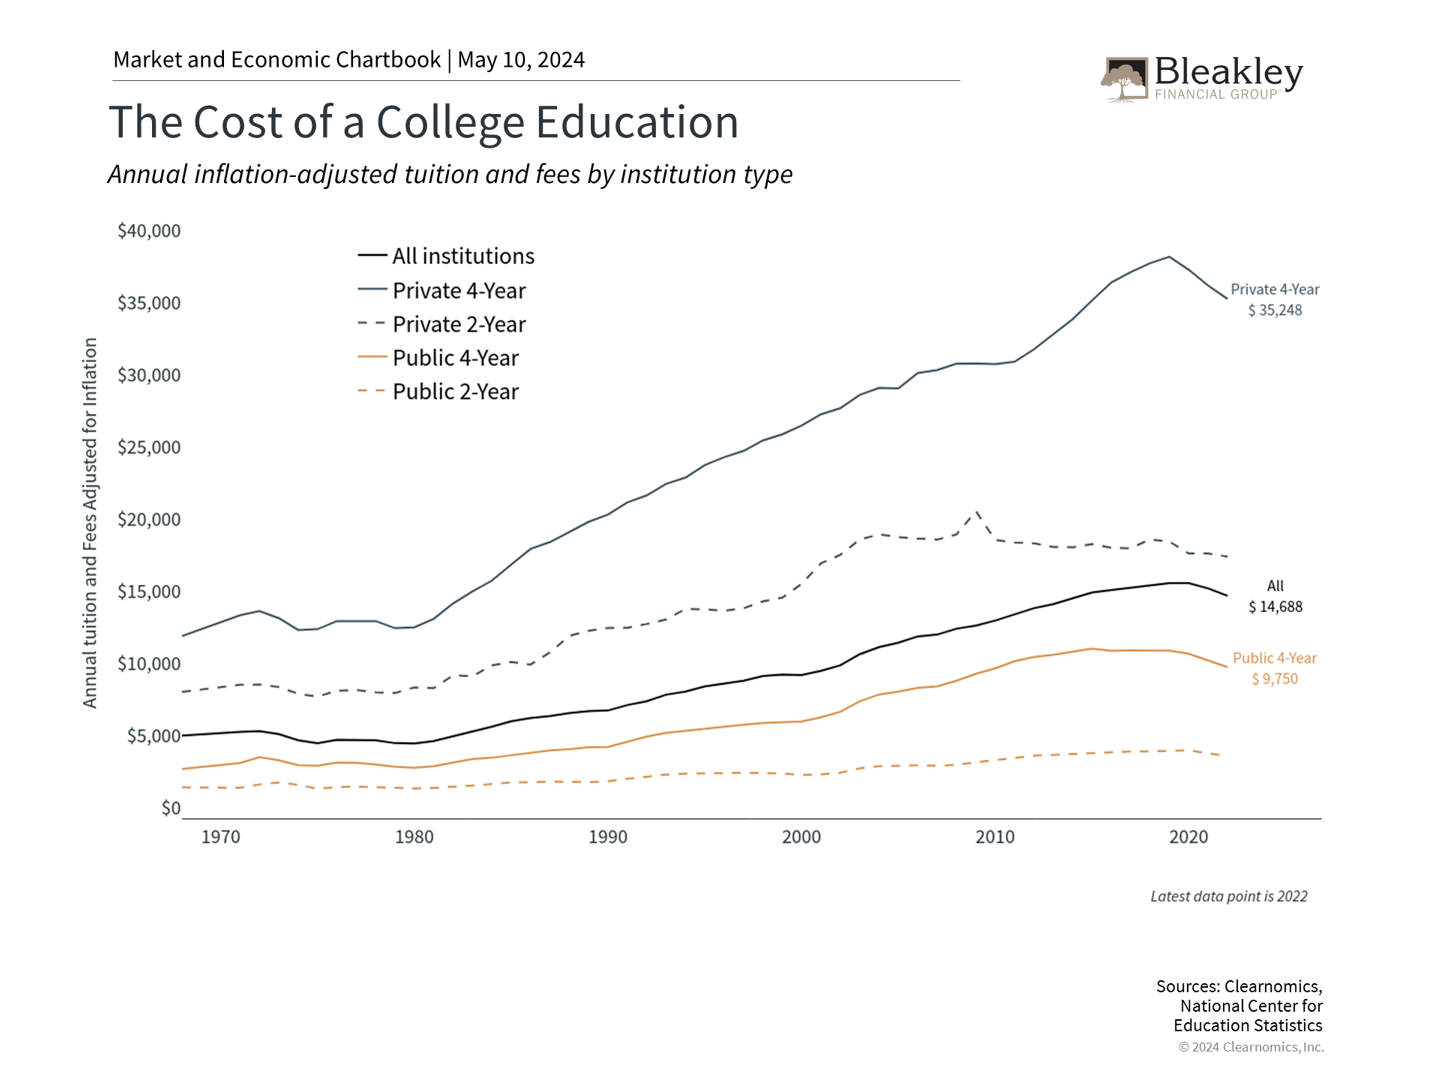 The Cost of a College Education